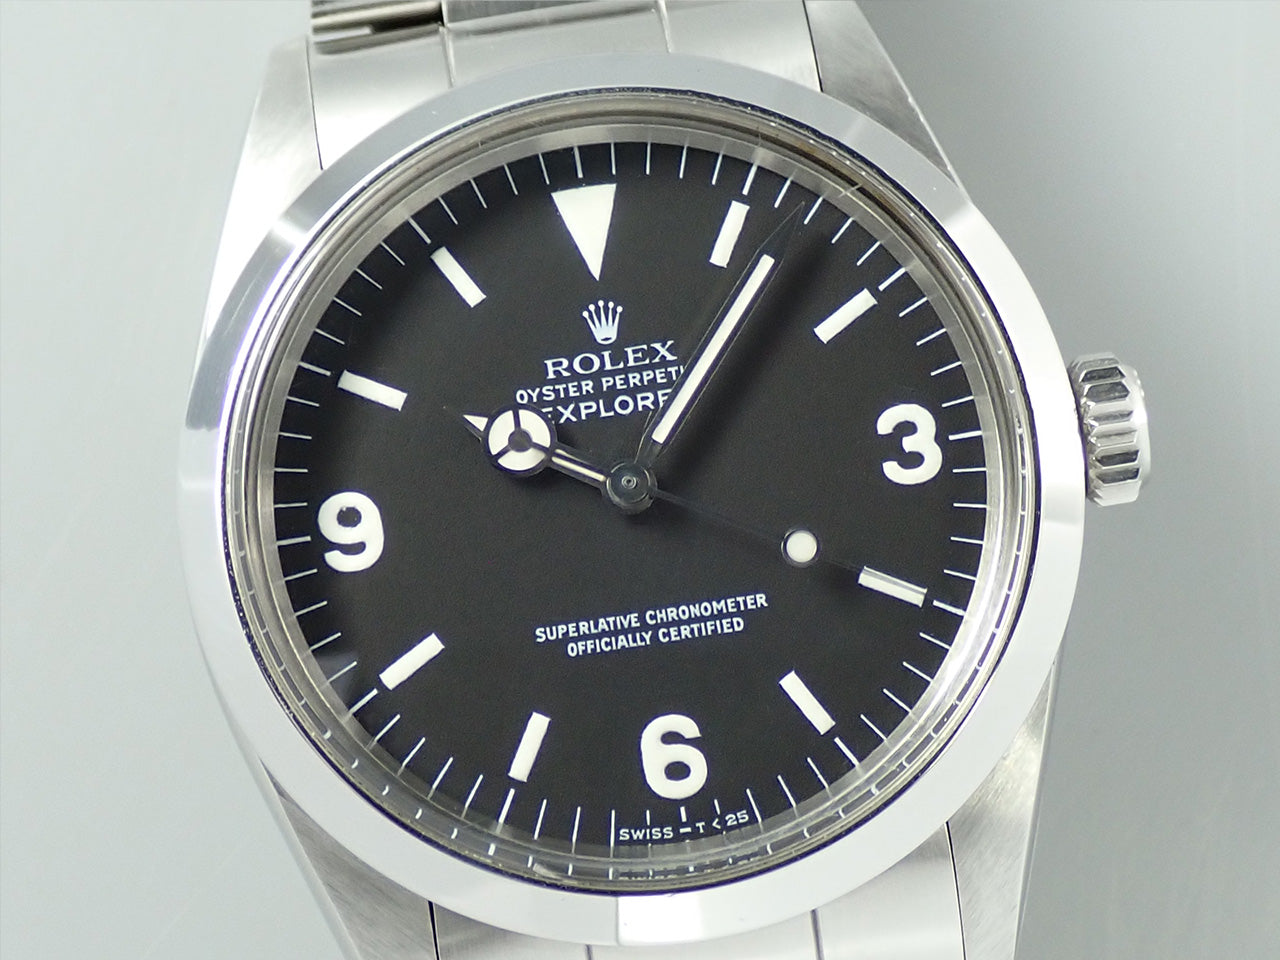 Rolex Explorer &lt;Warranty and Others&gt;